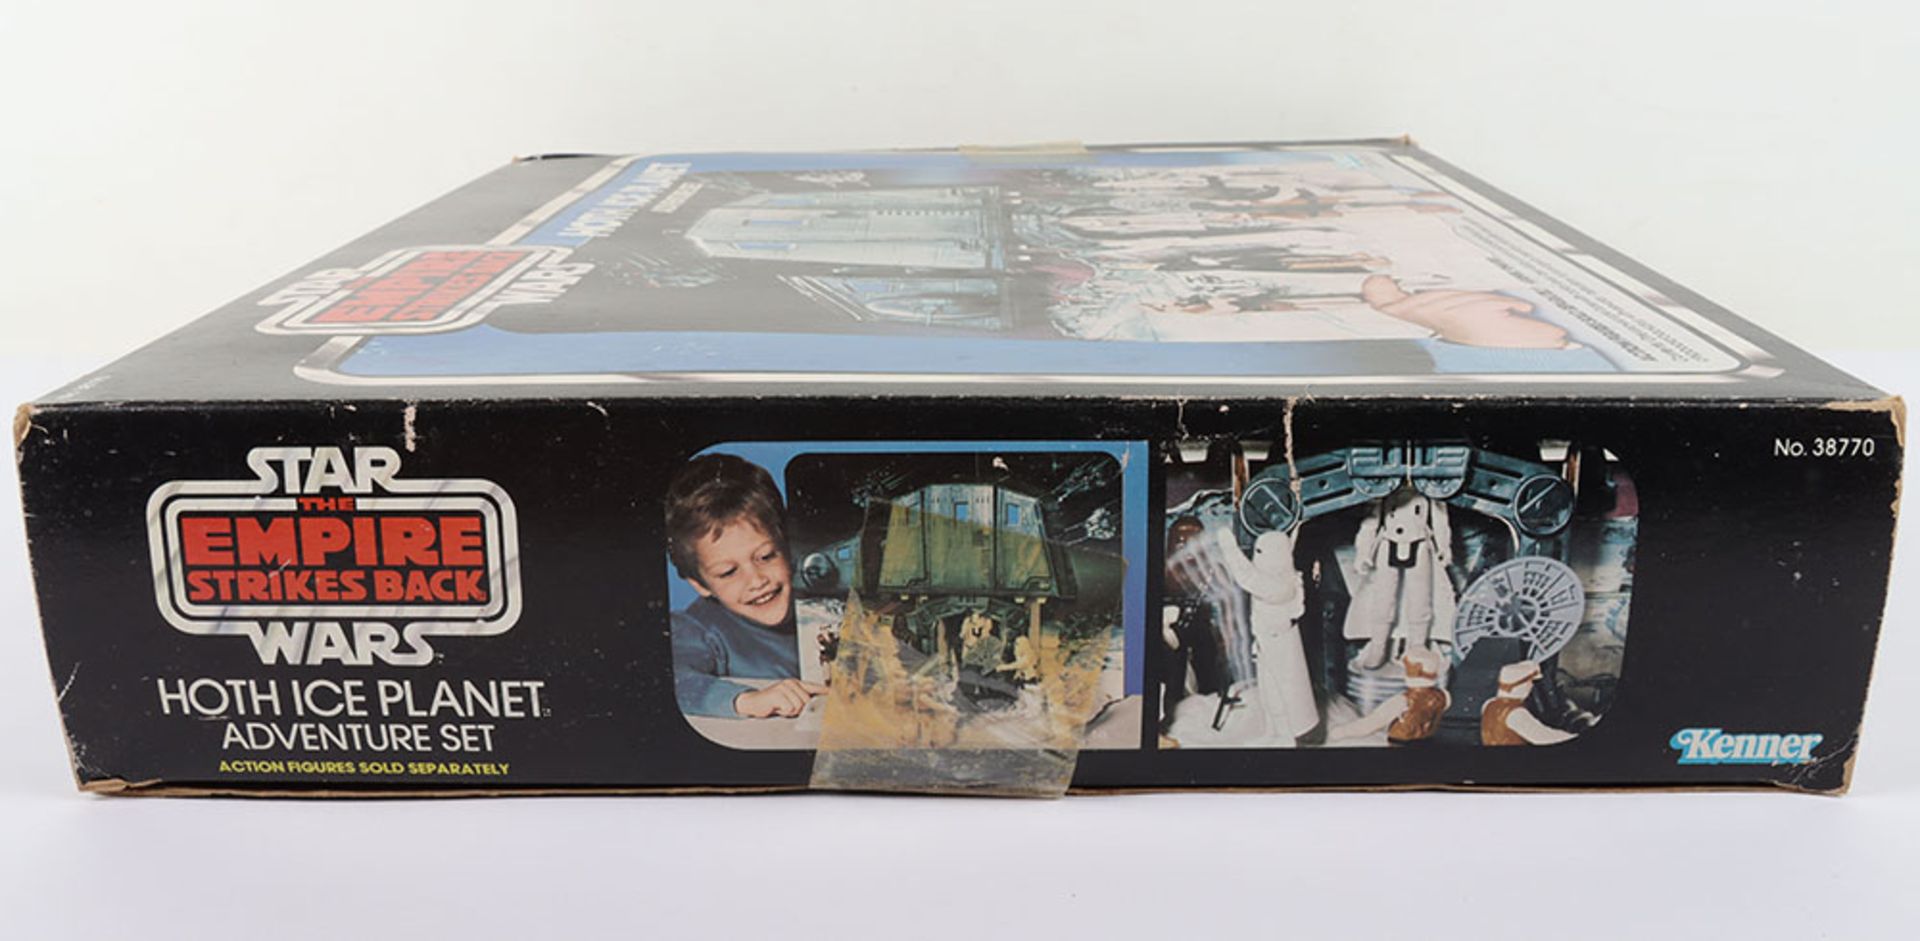 Boxed Vintage Kenner Star Wars The Empire Strikes Back Hoth Ice Planet Adventure Set - Image 13 of 16